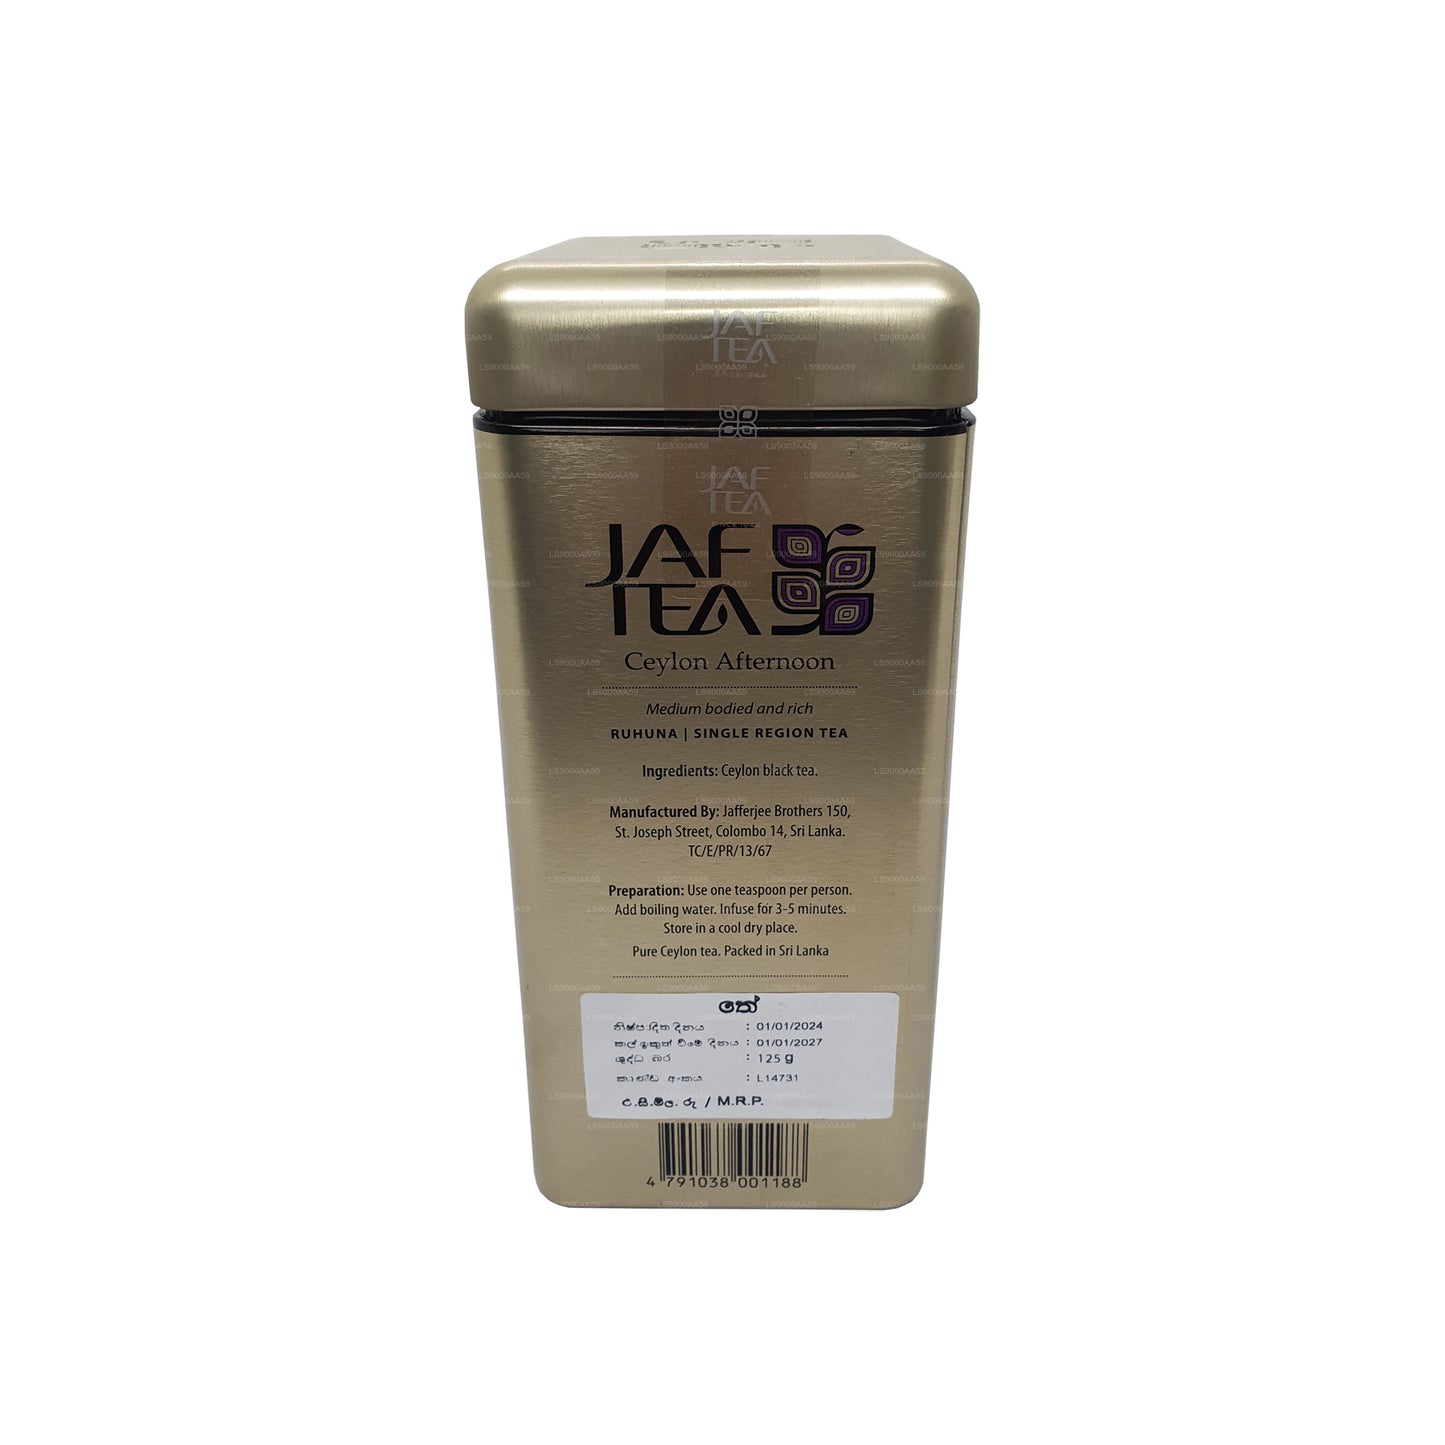 Jaf Tea Classic Gold Collection Ceylon Afternoon Caddy (125g)